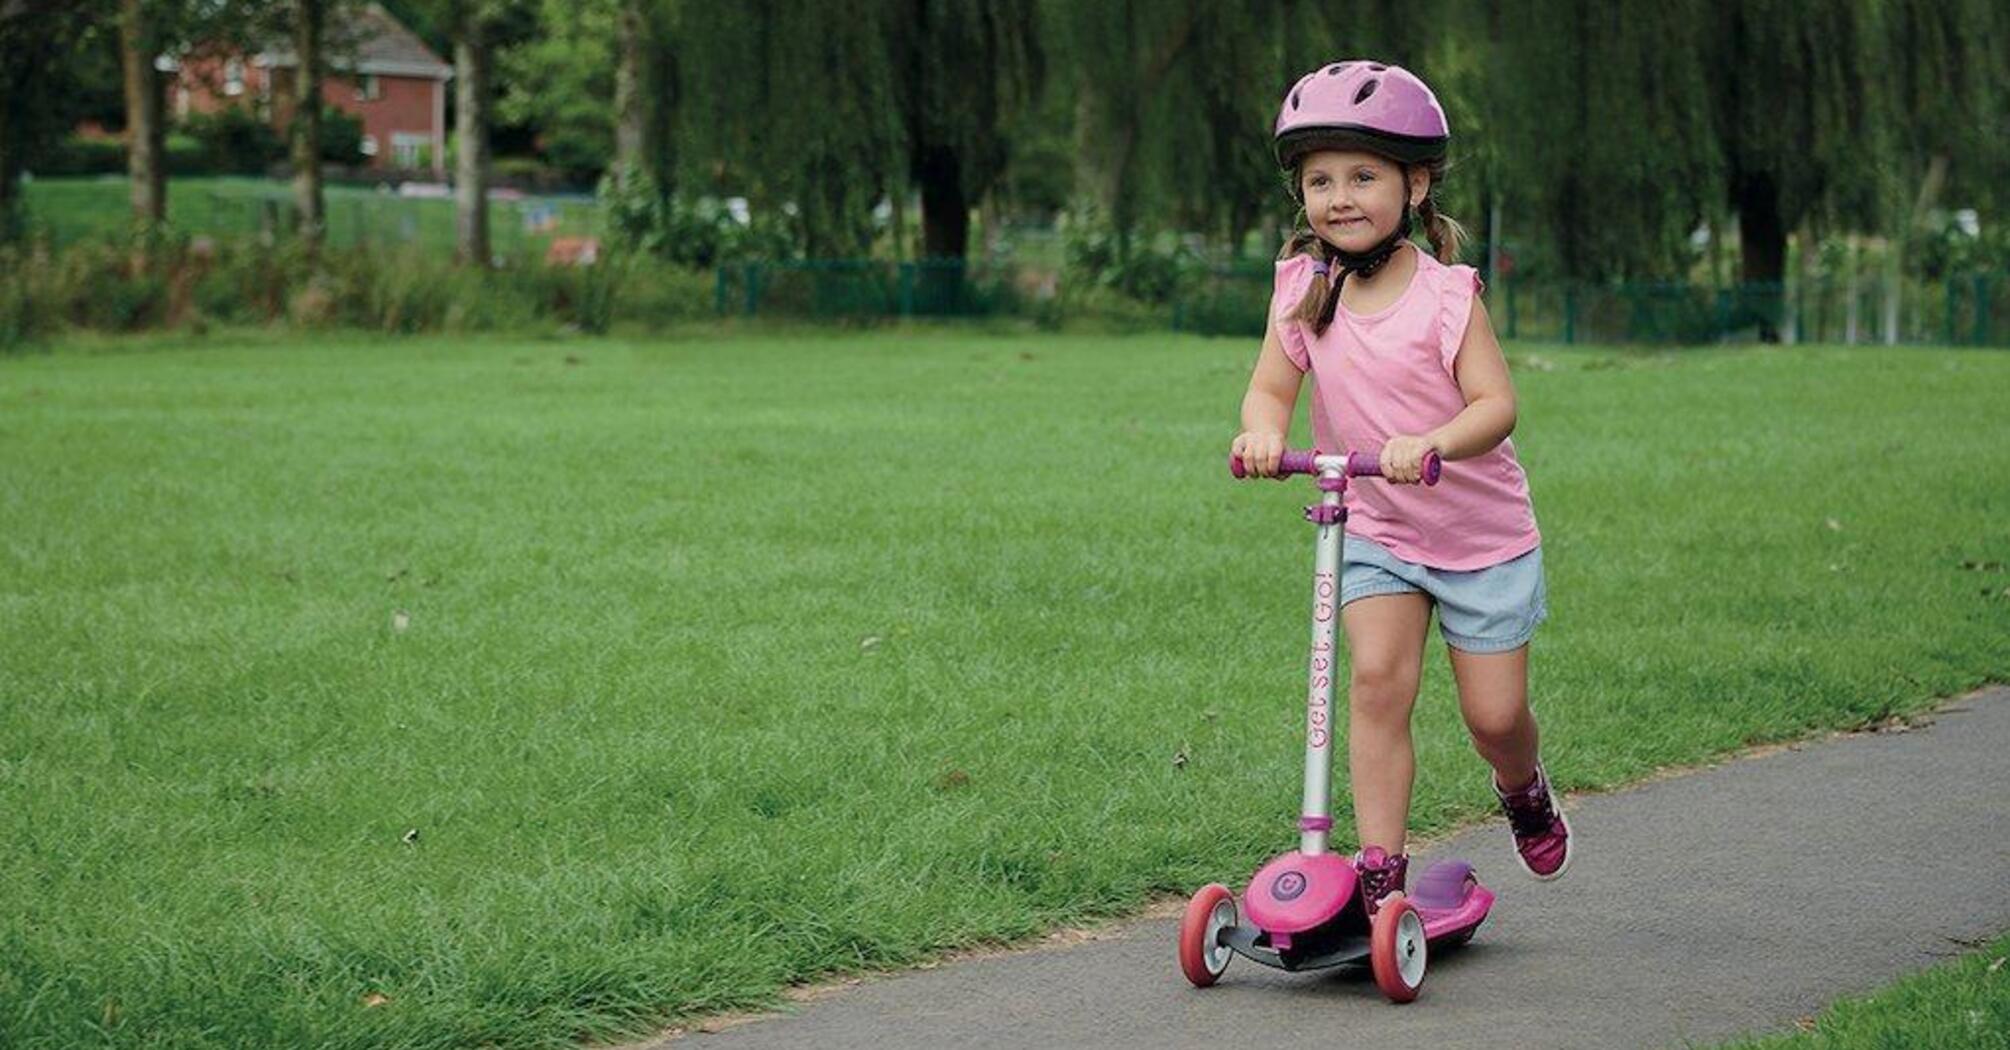 Buying a children's scooter